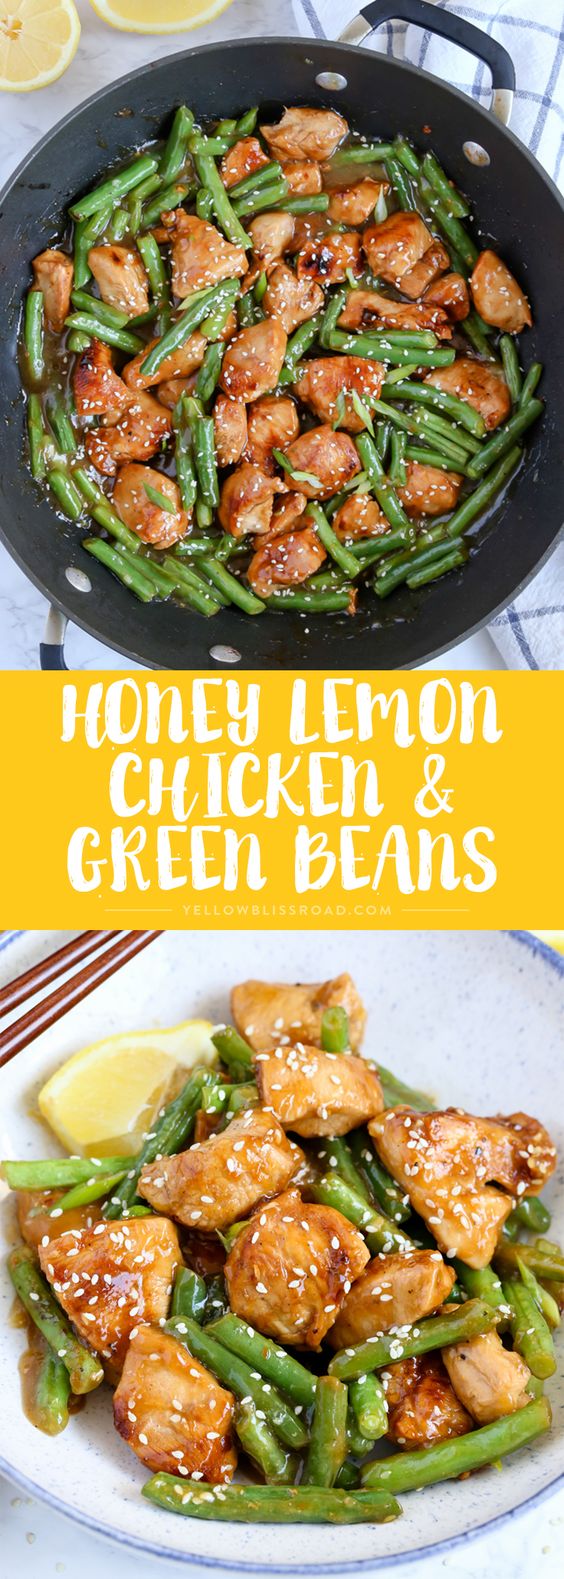 This Honey Lemon Chicken and Green Beans is a light and fresh meal with a ton of flavor. Dinner is on the table in just 20 minutes!